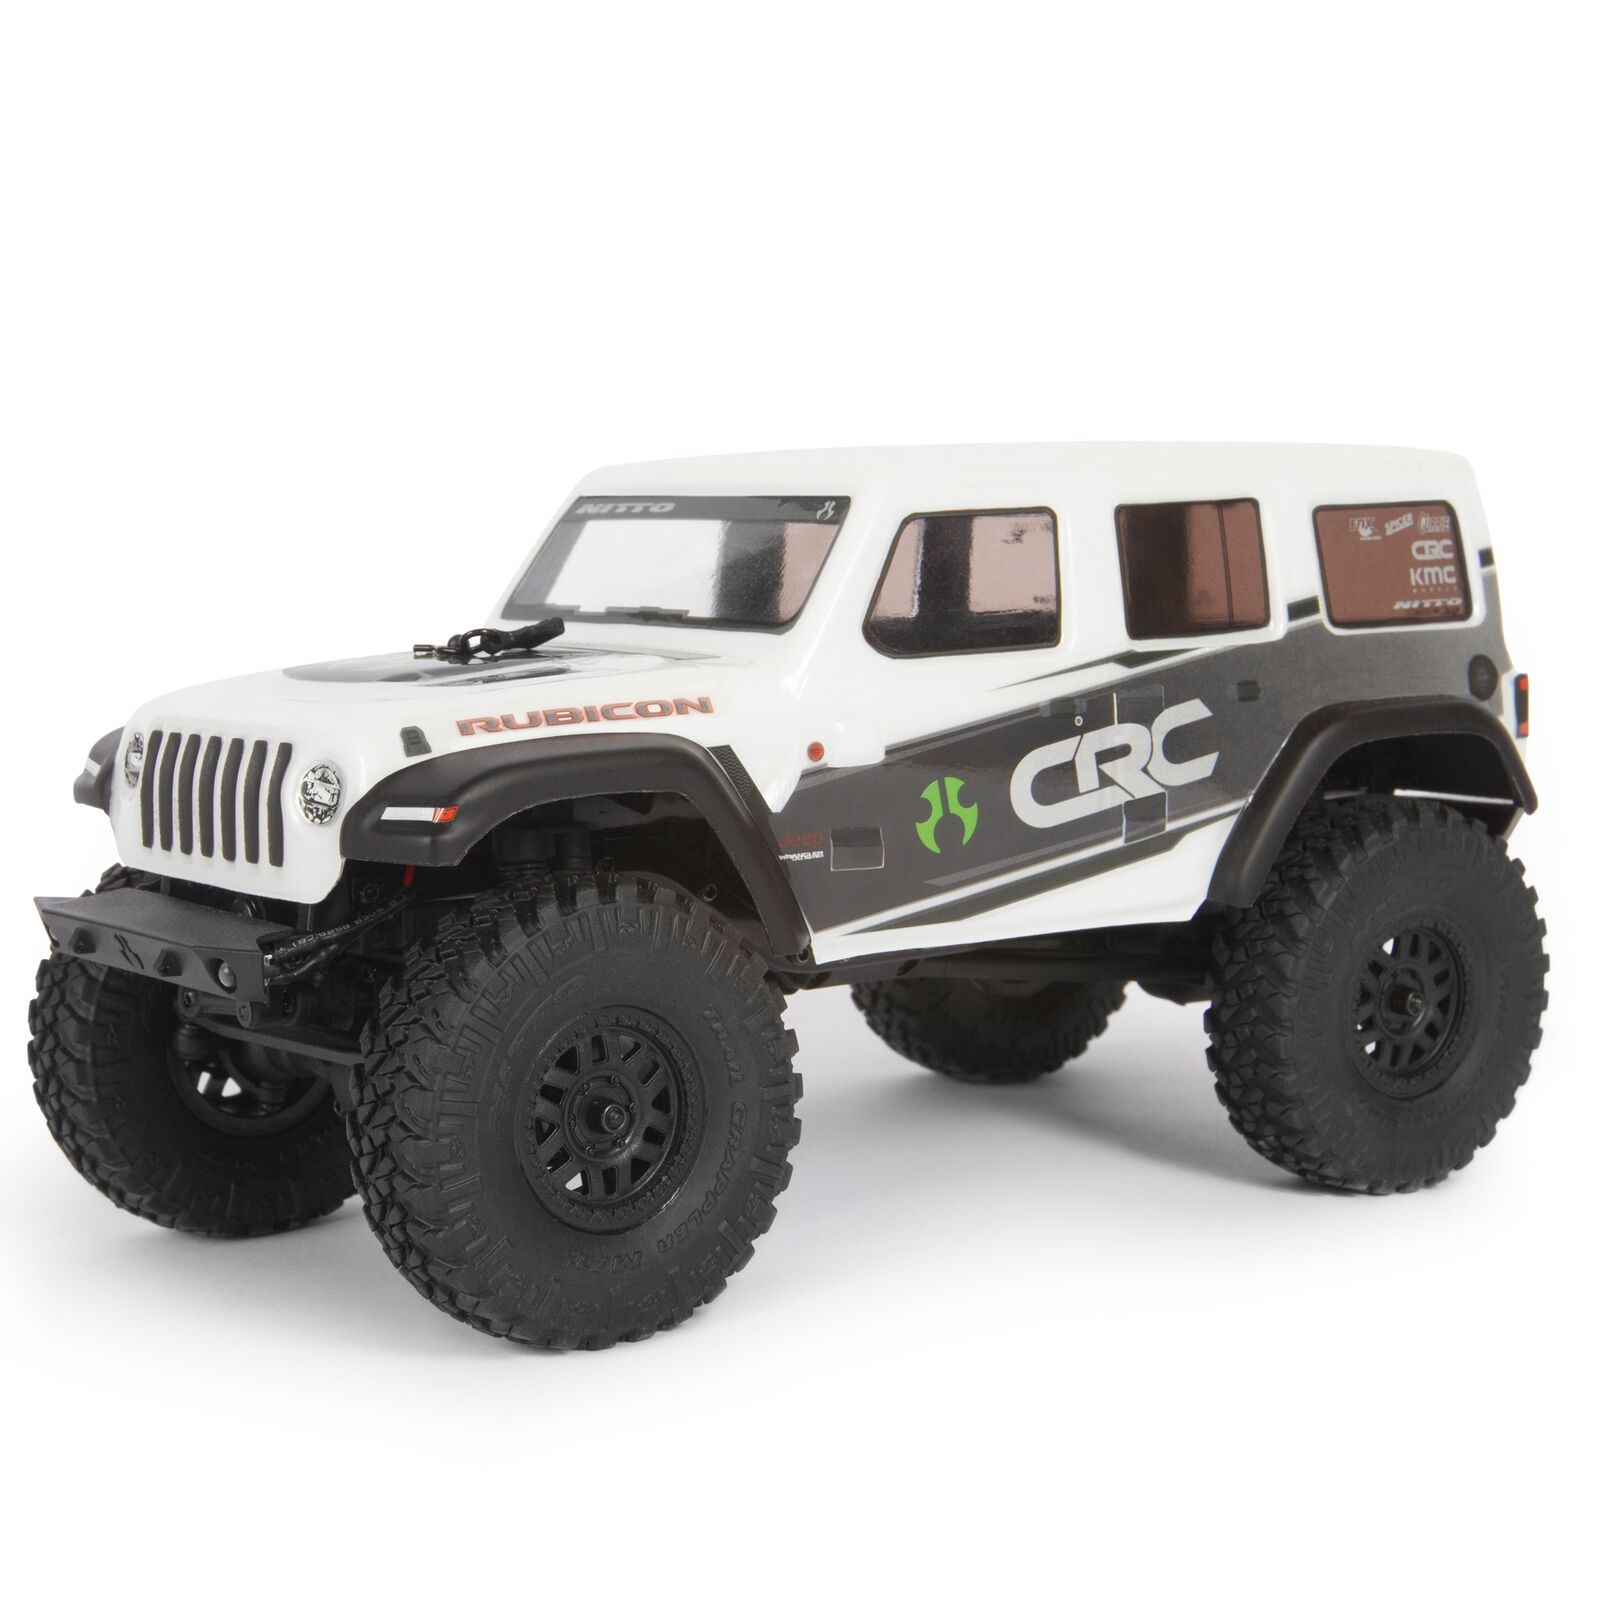 Axial’s Action Packed Small Scale Crawlers